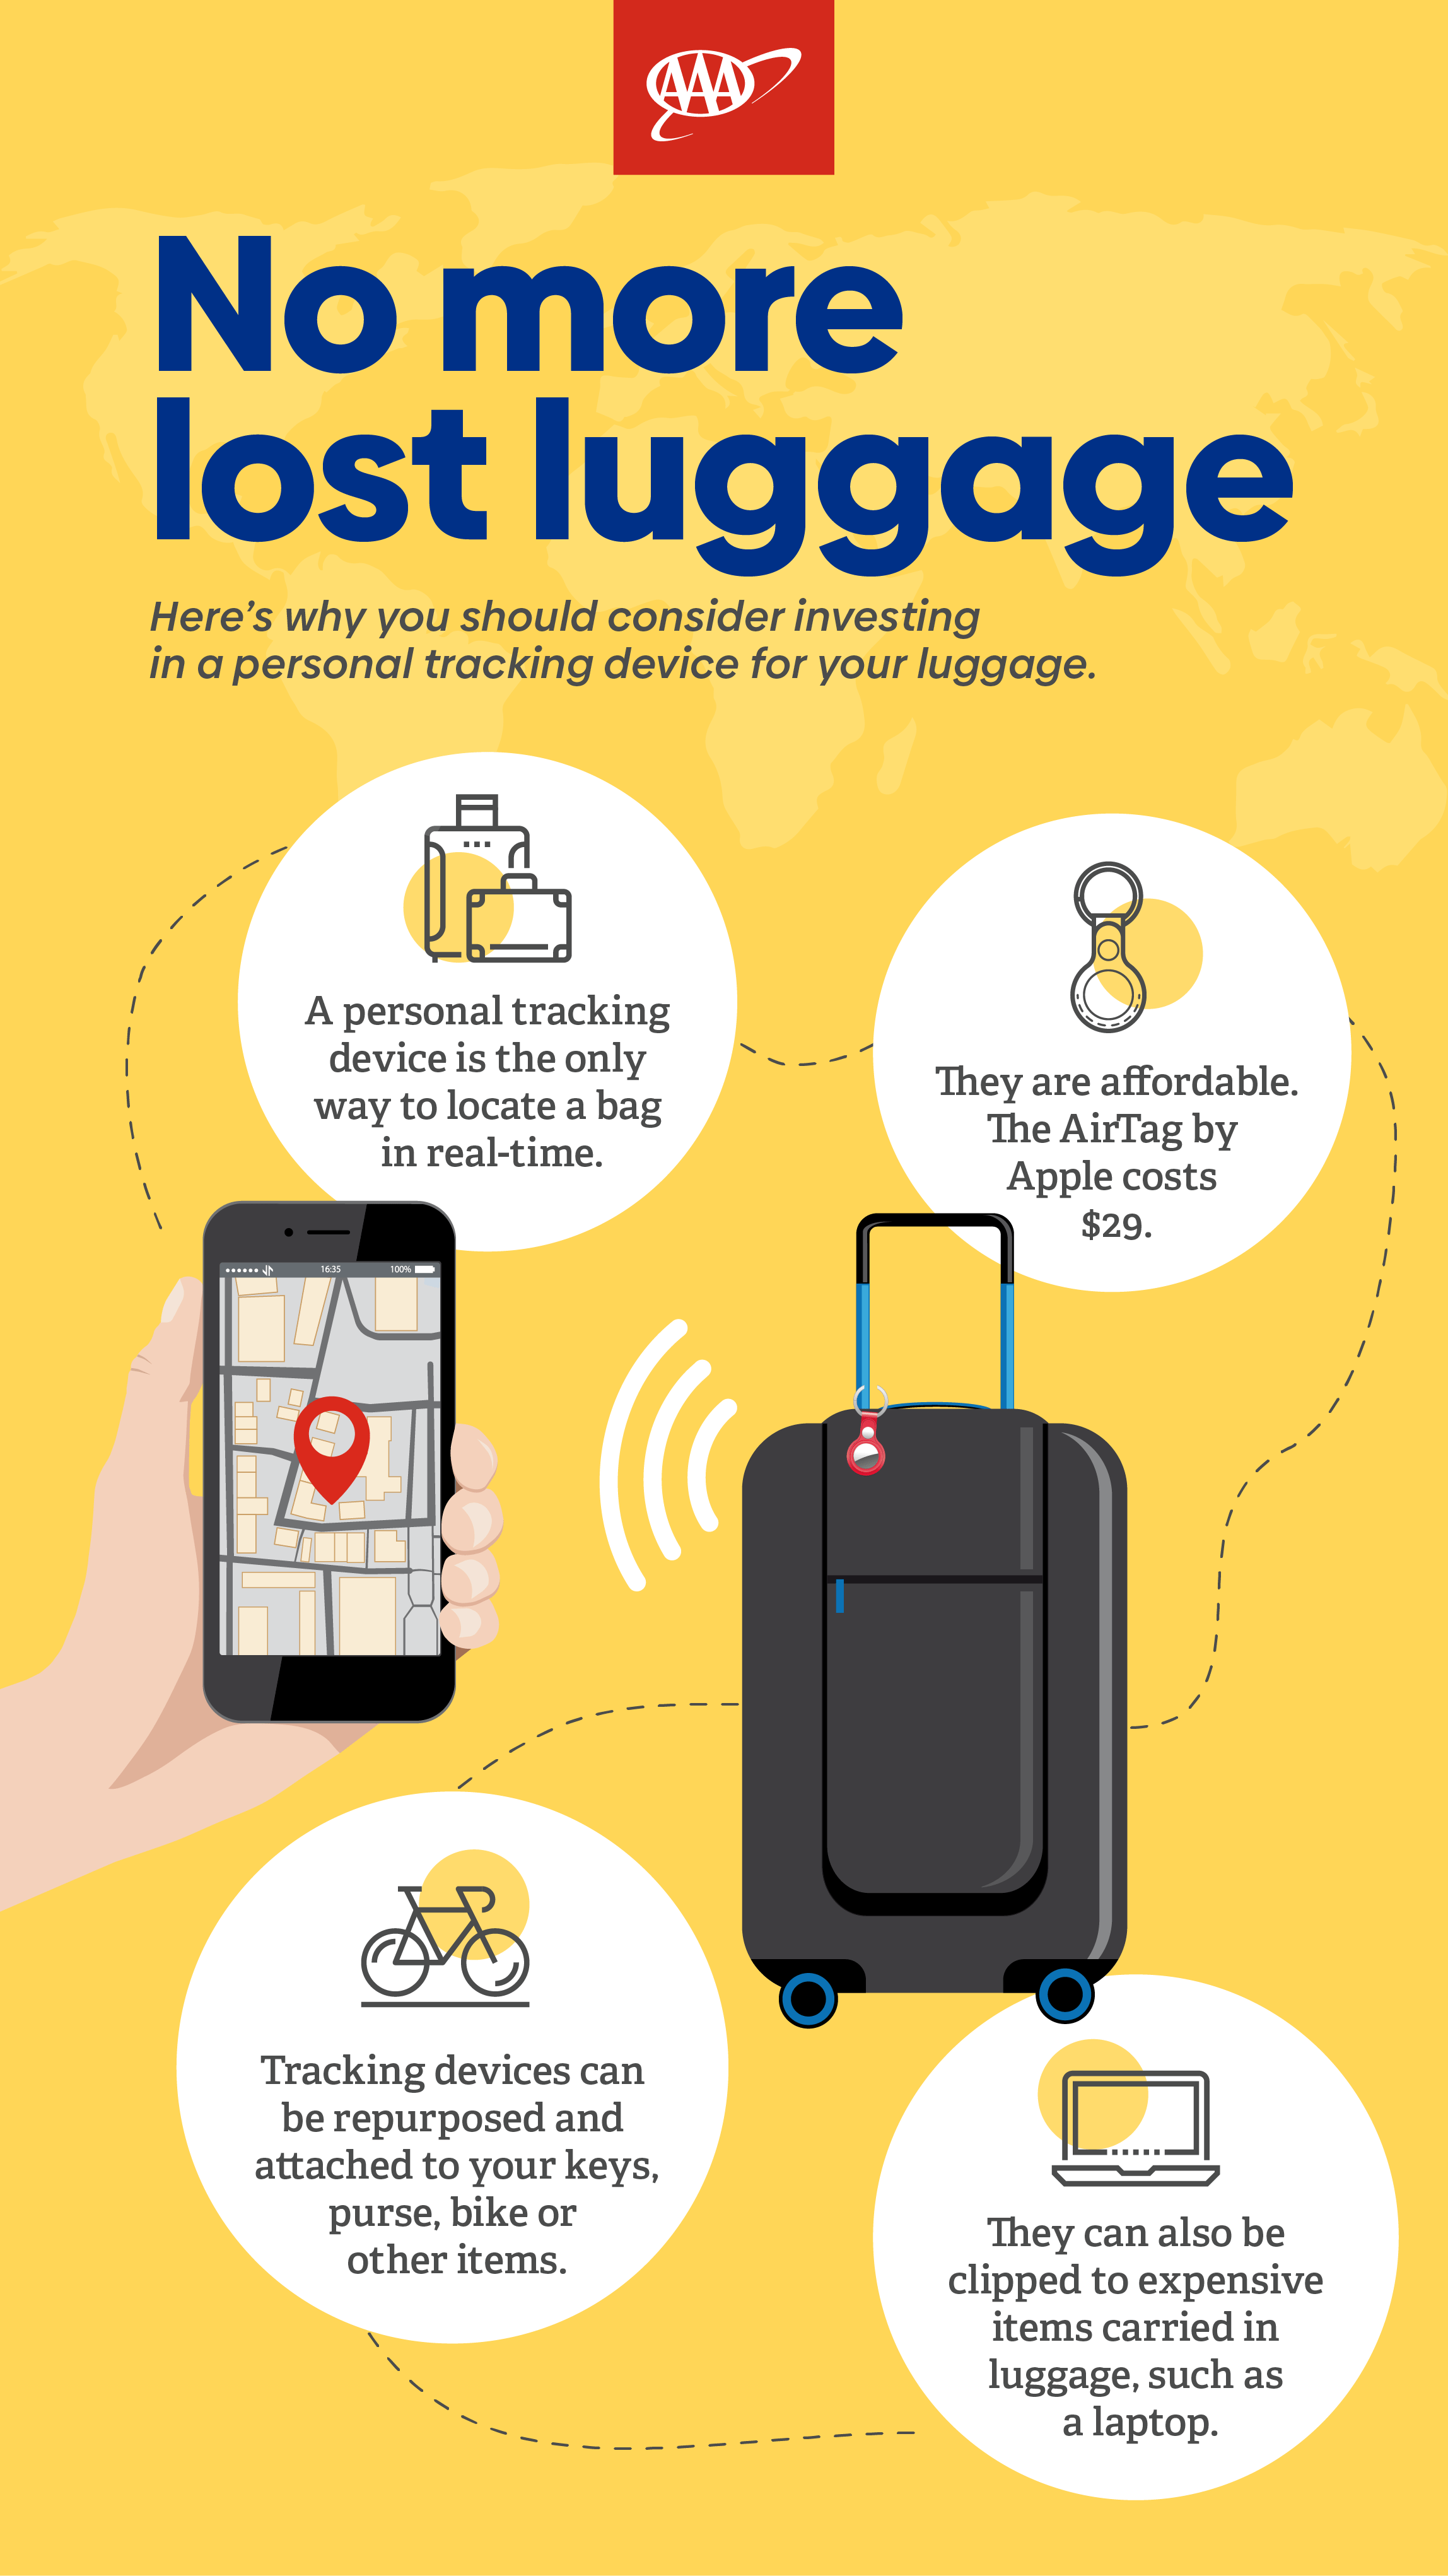 AAA infographic on tracking luggage